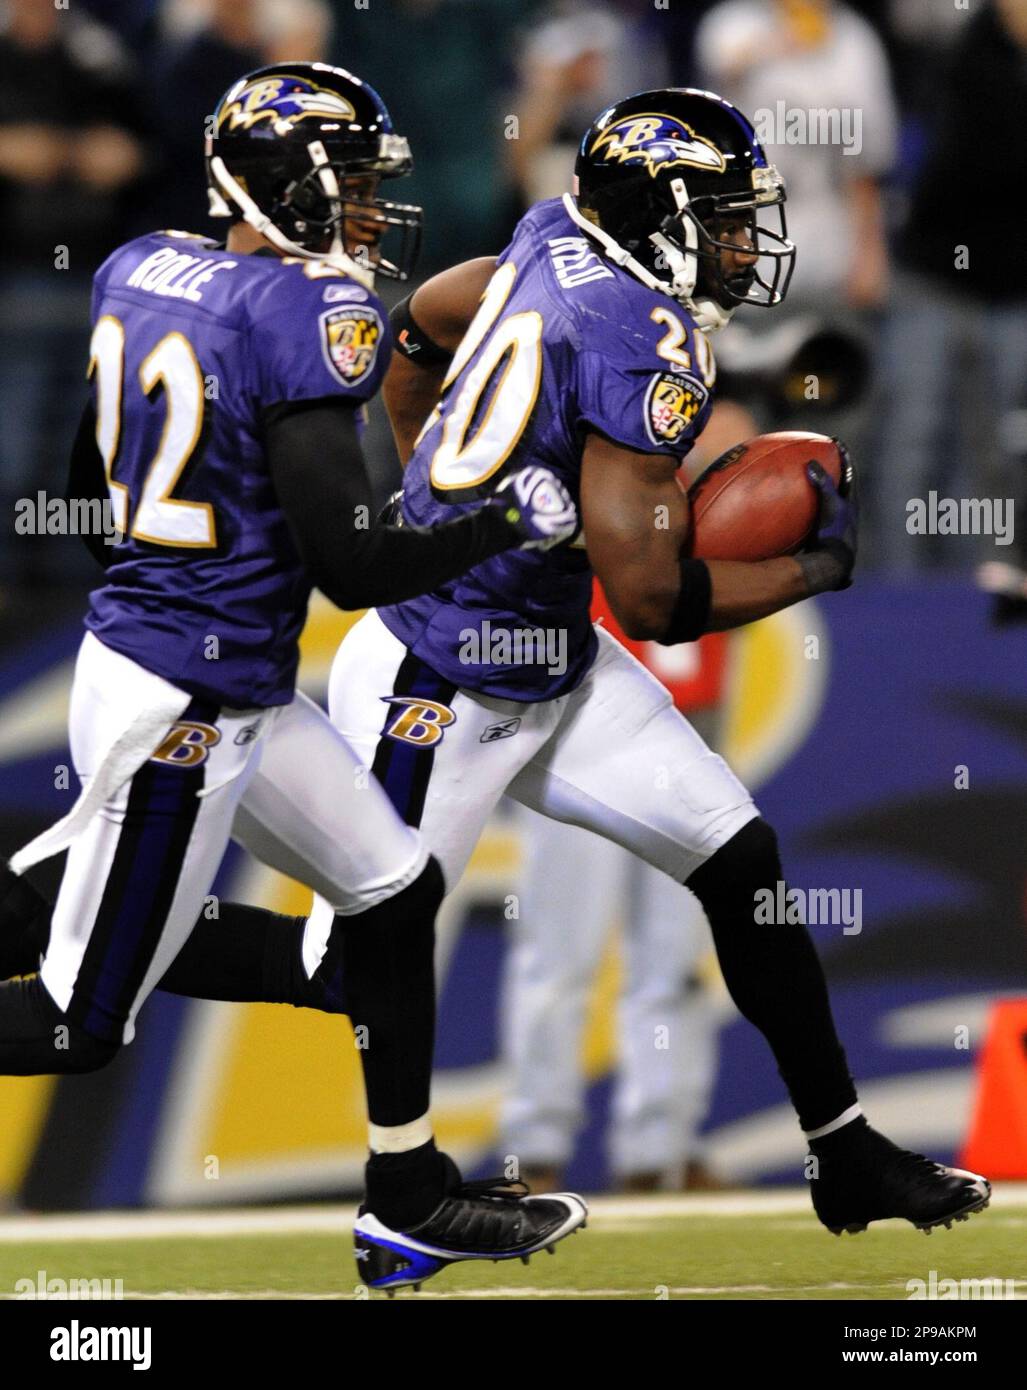 Dec. 13, 2010 - Houston, Texas, United States of America - Baltimore Ravens  safety Ed Reed (20) stretches before the game between the Houston Texans  and the Baltimore Ravens. The Ravens defeated